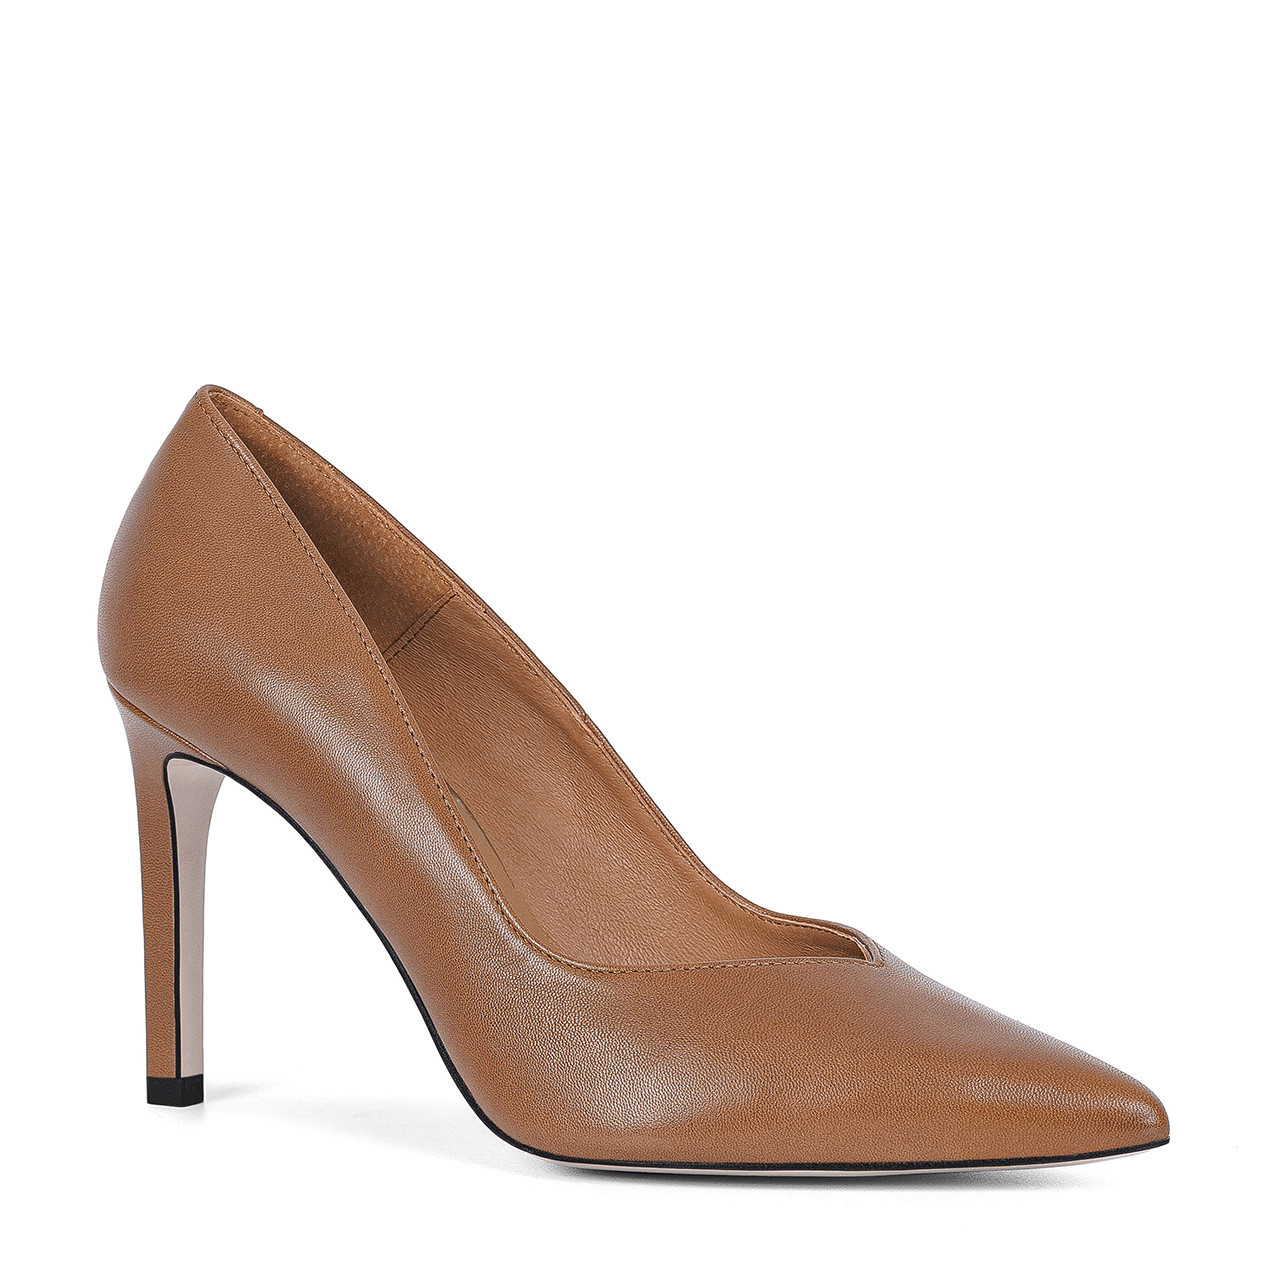 Brown high heels made of natural leather with a cutout at the front